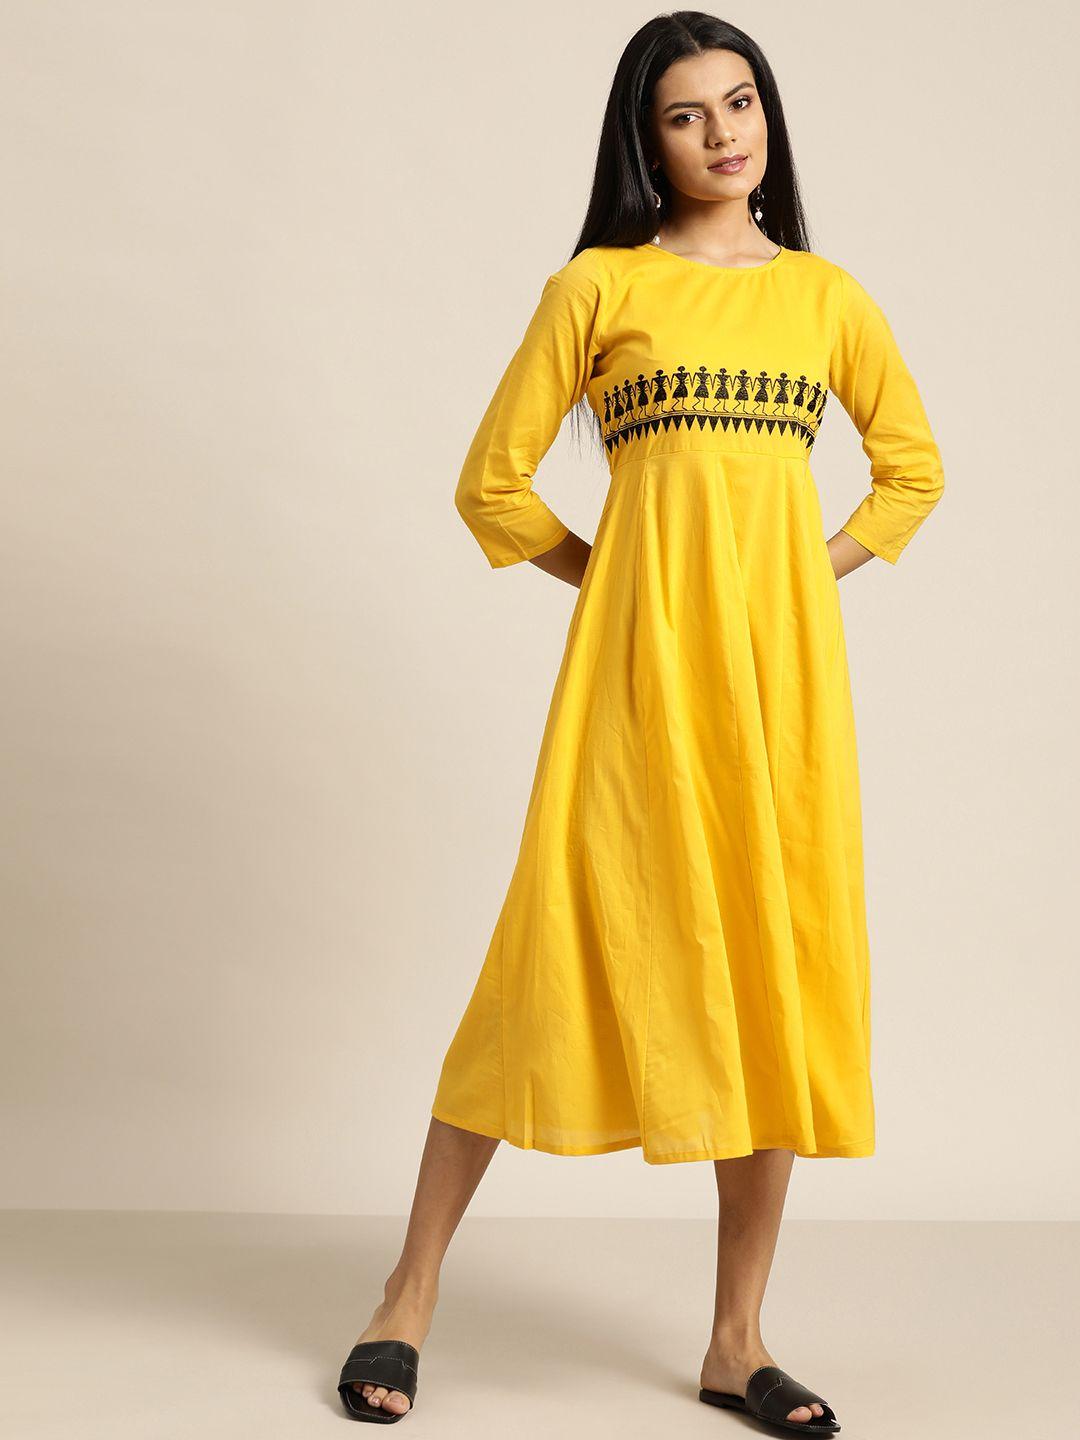 shae by sassafras yellow tribal embroidered a-line cotton midi dress